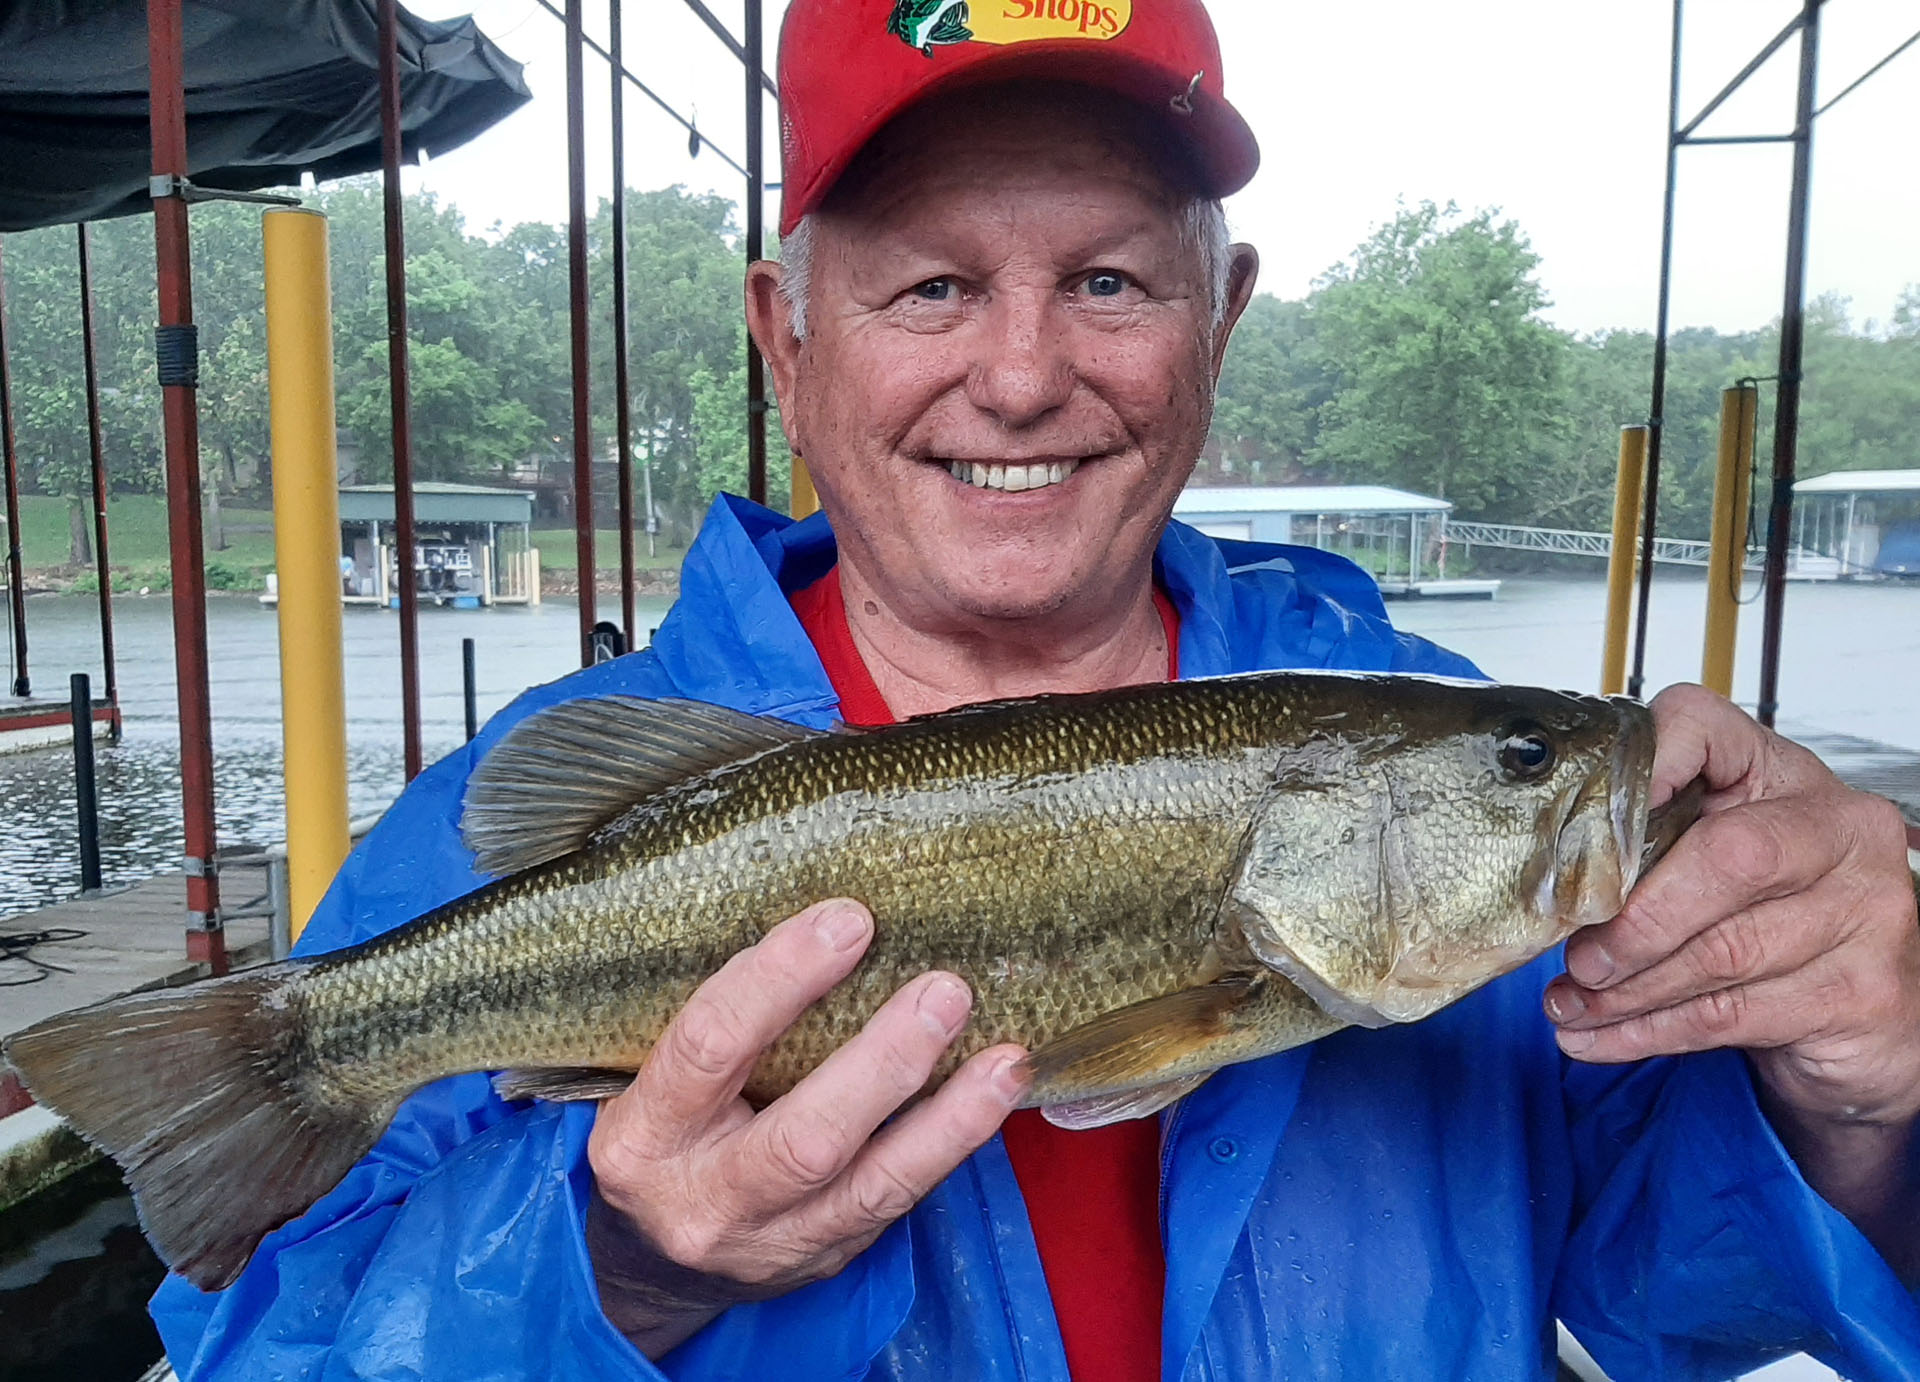 Photo of Mike holding Bass fish